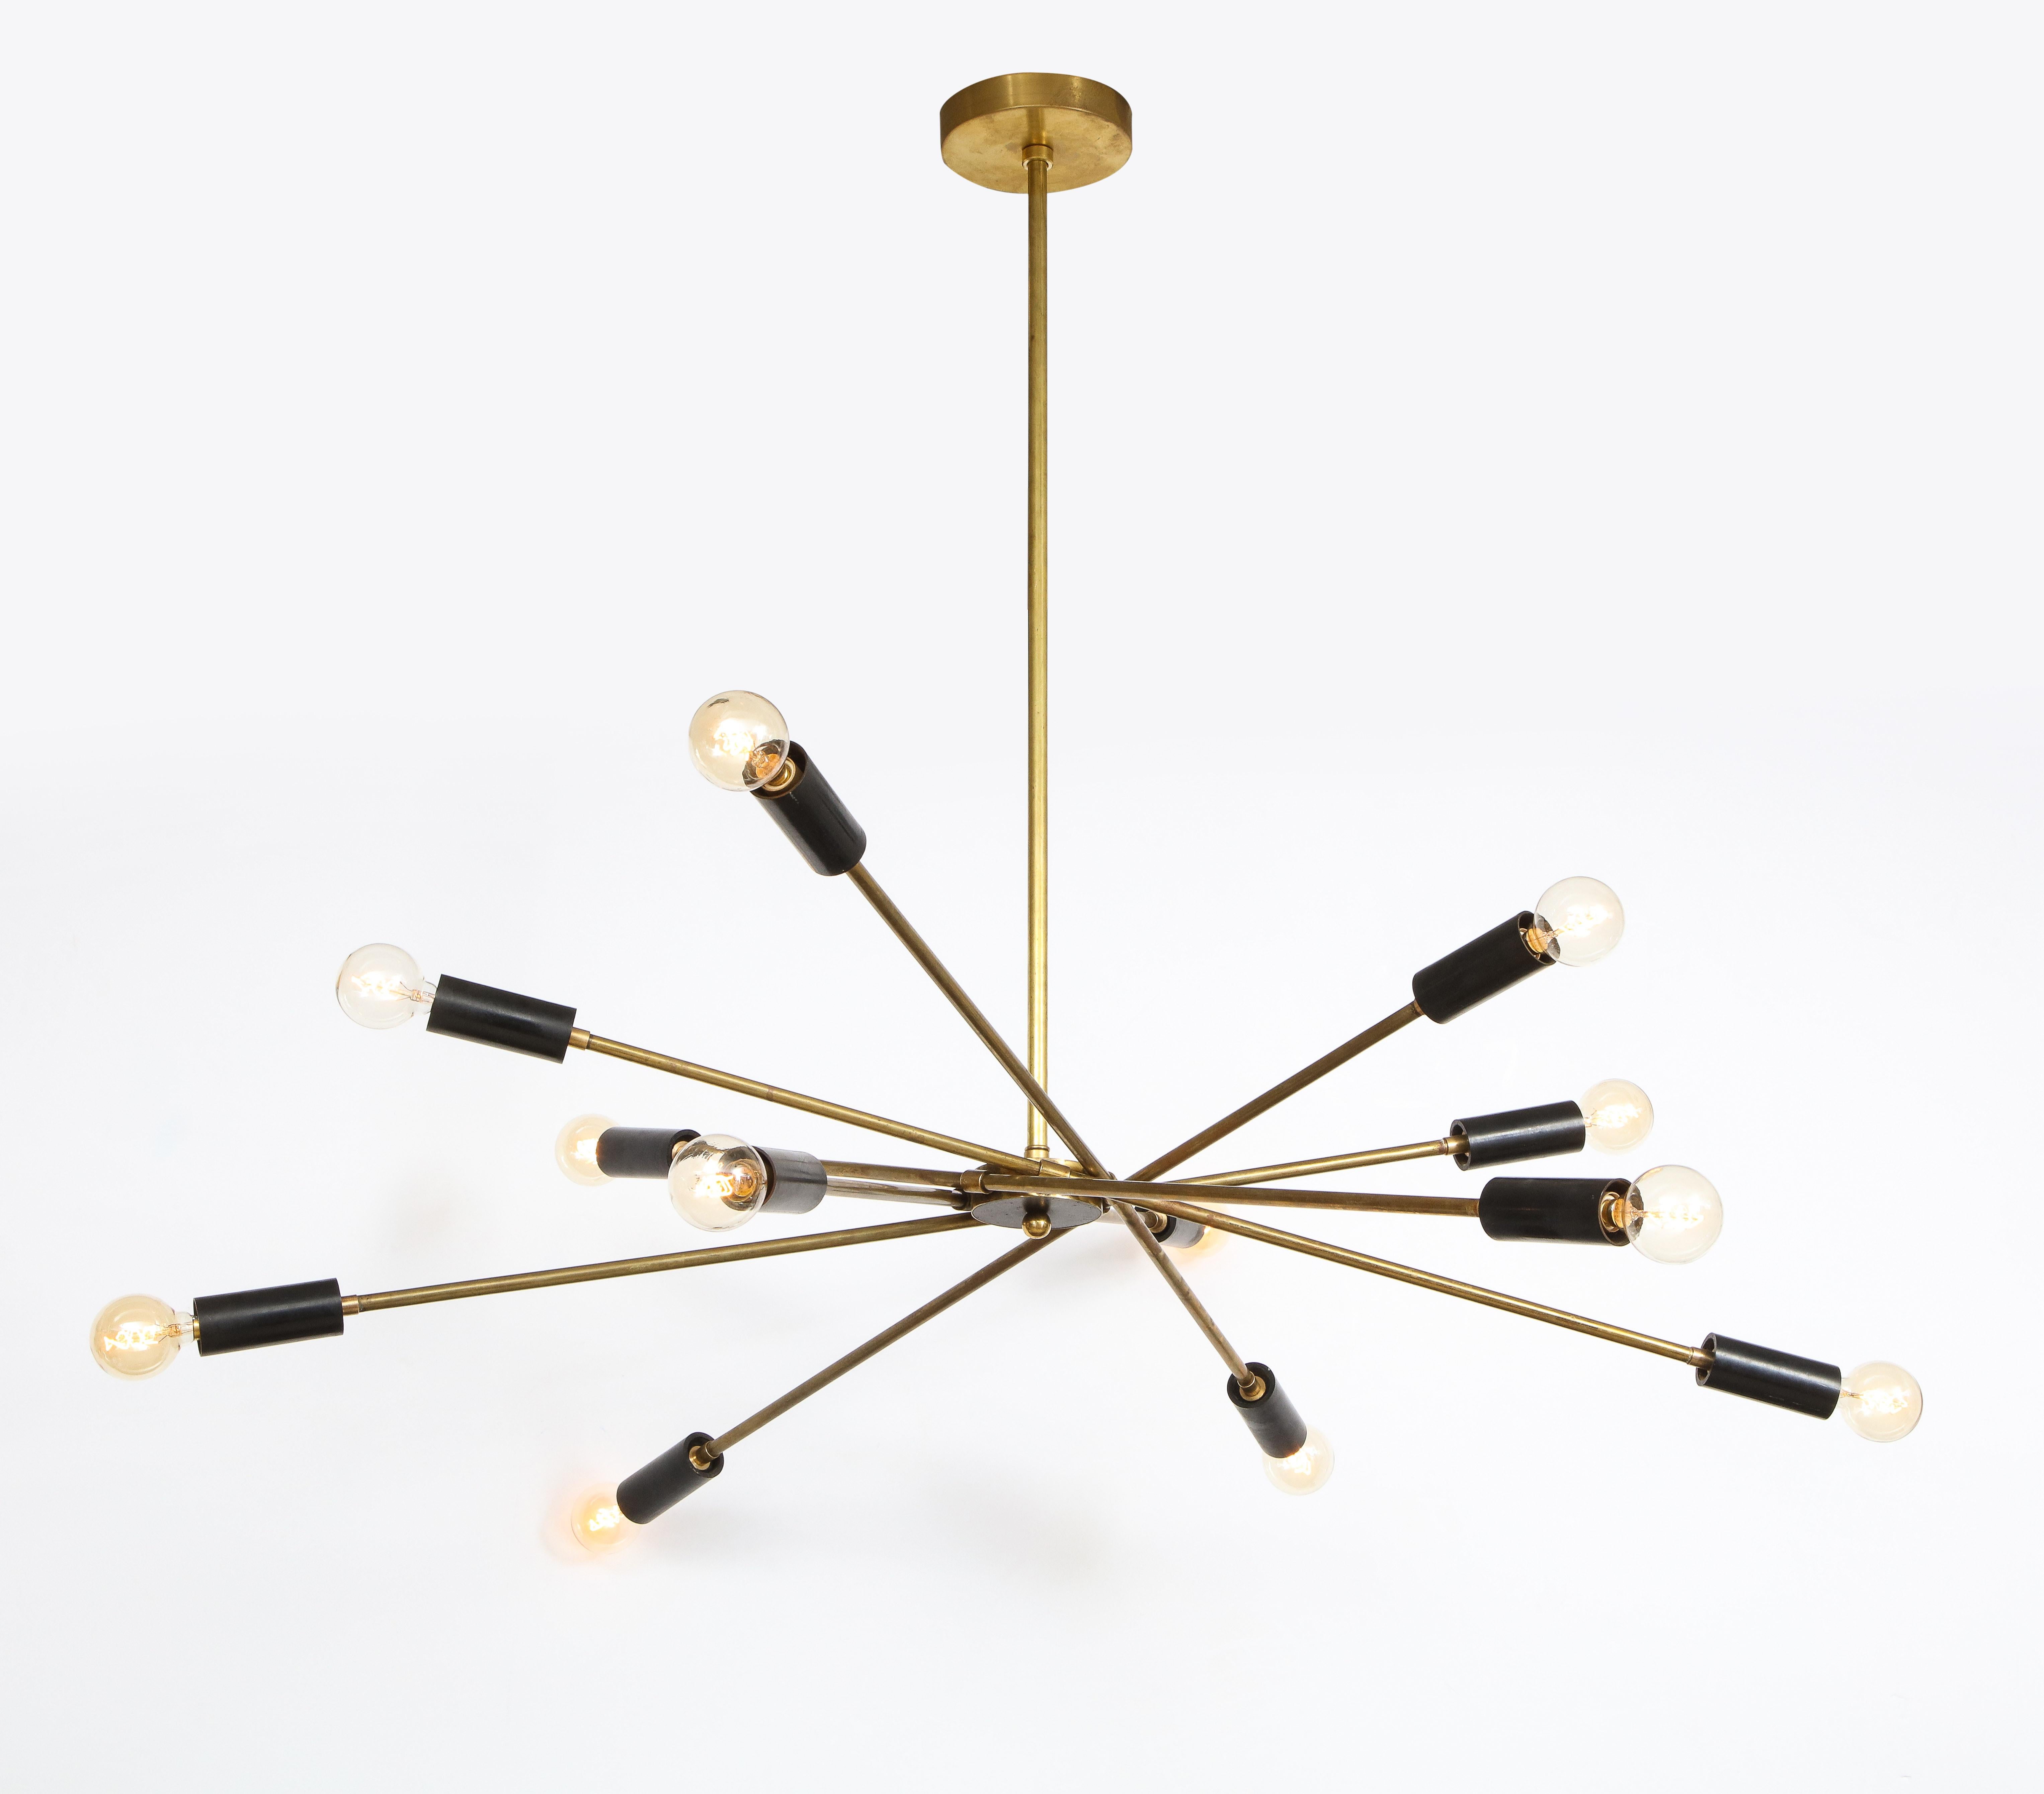 Stunning Italian Mid-Century black and brass sputnik chandelier.

This unique and sculptural chandelier consists of 6 artfully balanced brass arms with blackened candelabra sockets on either end, amounting to 12 lights total. This particular model